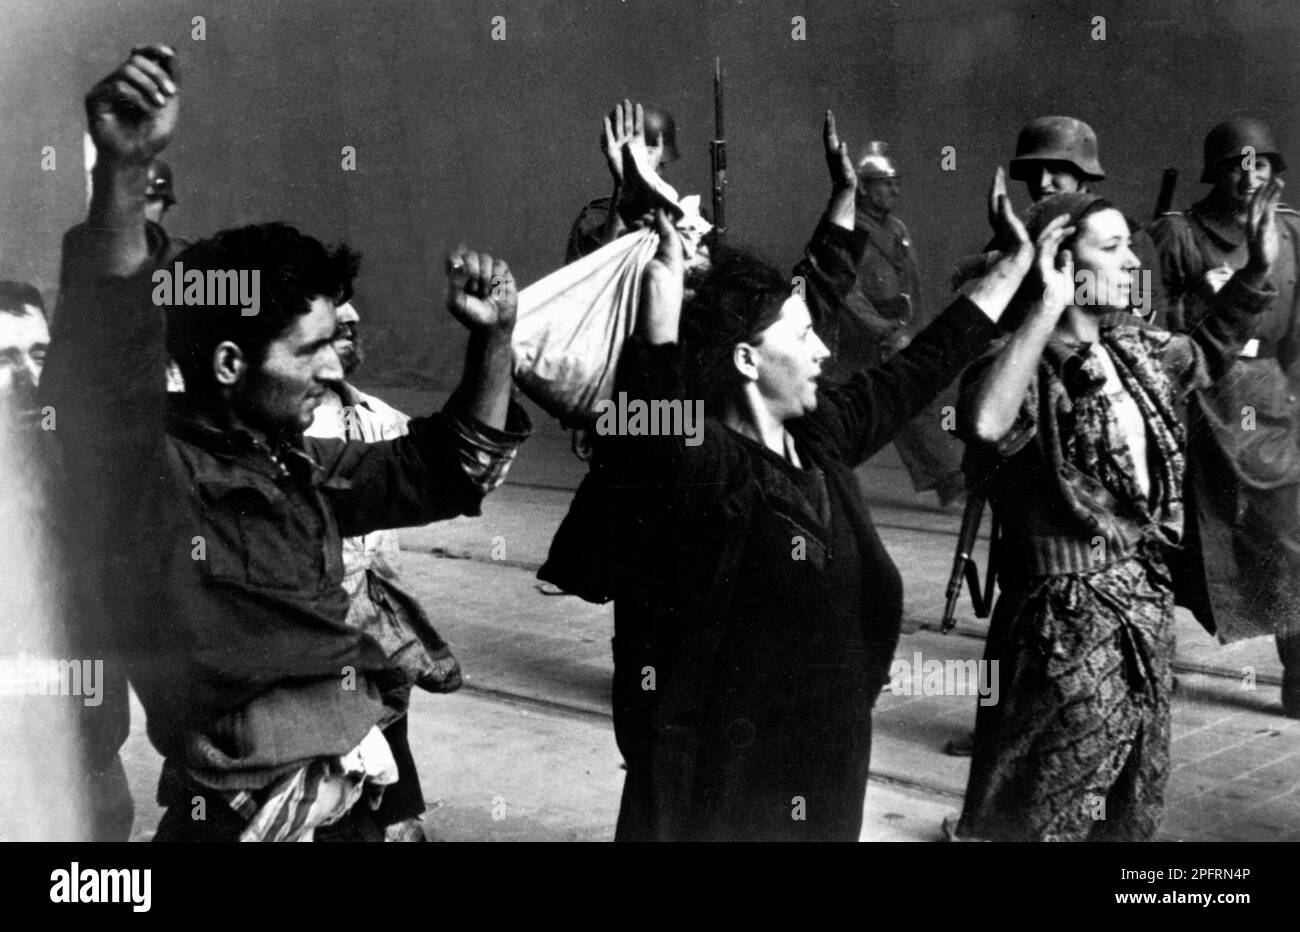 In January 1943 the nazis arrived to round up the Jews of the Warsaw Ghetto  The Jews, resolved to fight it out, took on the SS with homemade and primitive weapons. The defenders were executed or deported and the Ghetto area was systematically demolished. This event is known as The Ghetto Uprising. This image shows a group of jewish women surrendering, hands up, to German soldiers. The Woman on the right has been named as Hasia Szylgold-Szpiro.  This image is from the German photographic record of the event, known as the Stroop report. Stock Photo